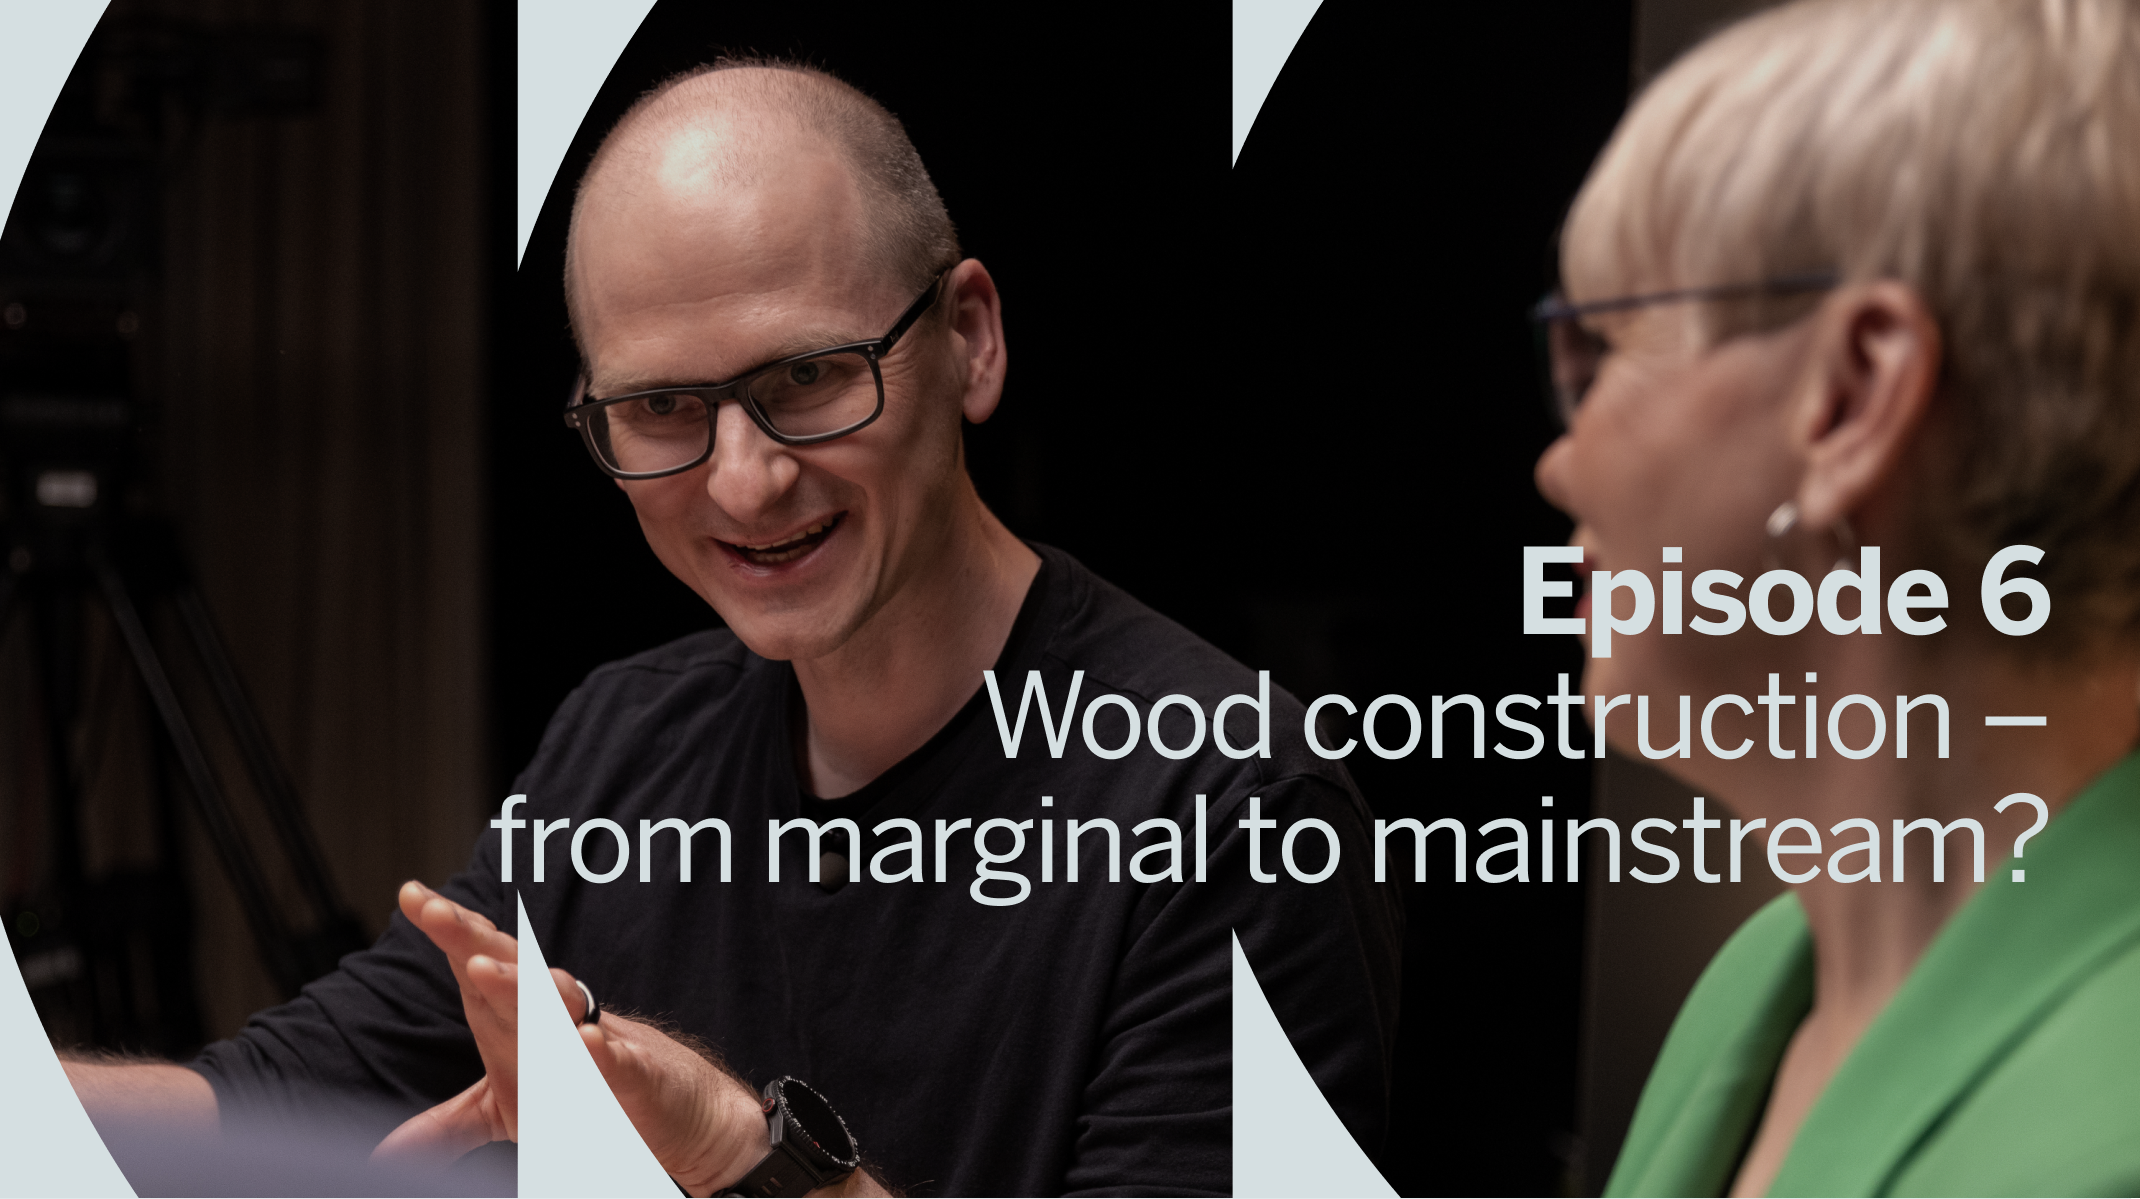 Wood construction – from marginal to mainstream?